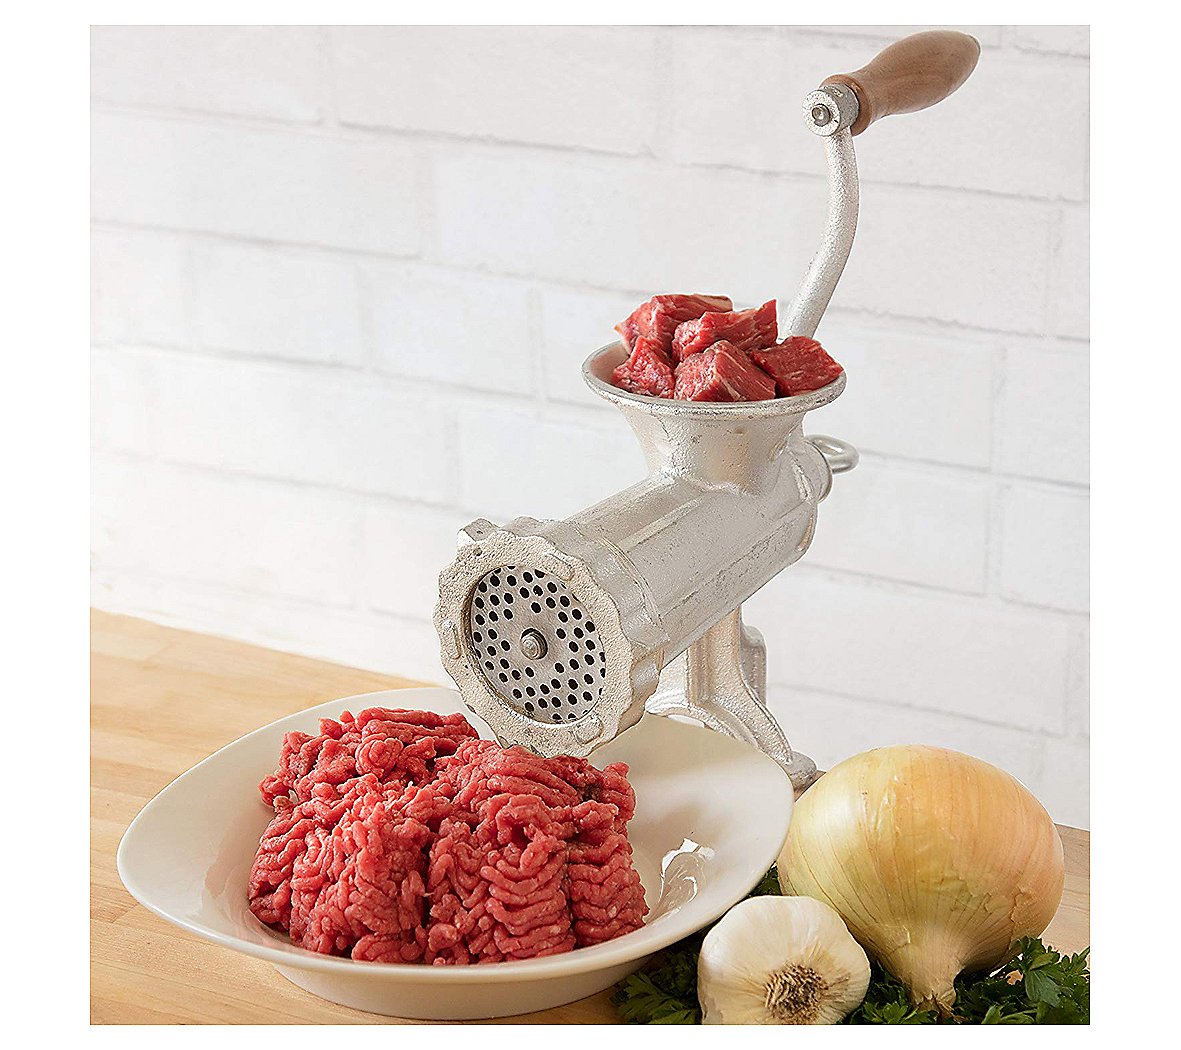 Bene Casa Cast Iron Manual Meat Grinder with Wo oden Handle